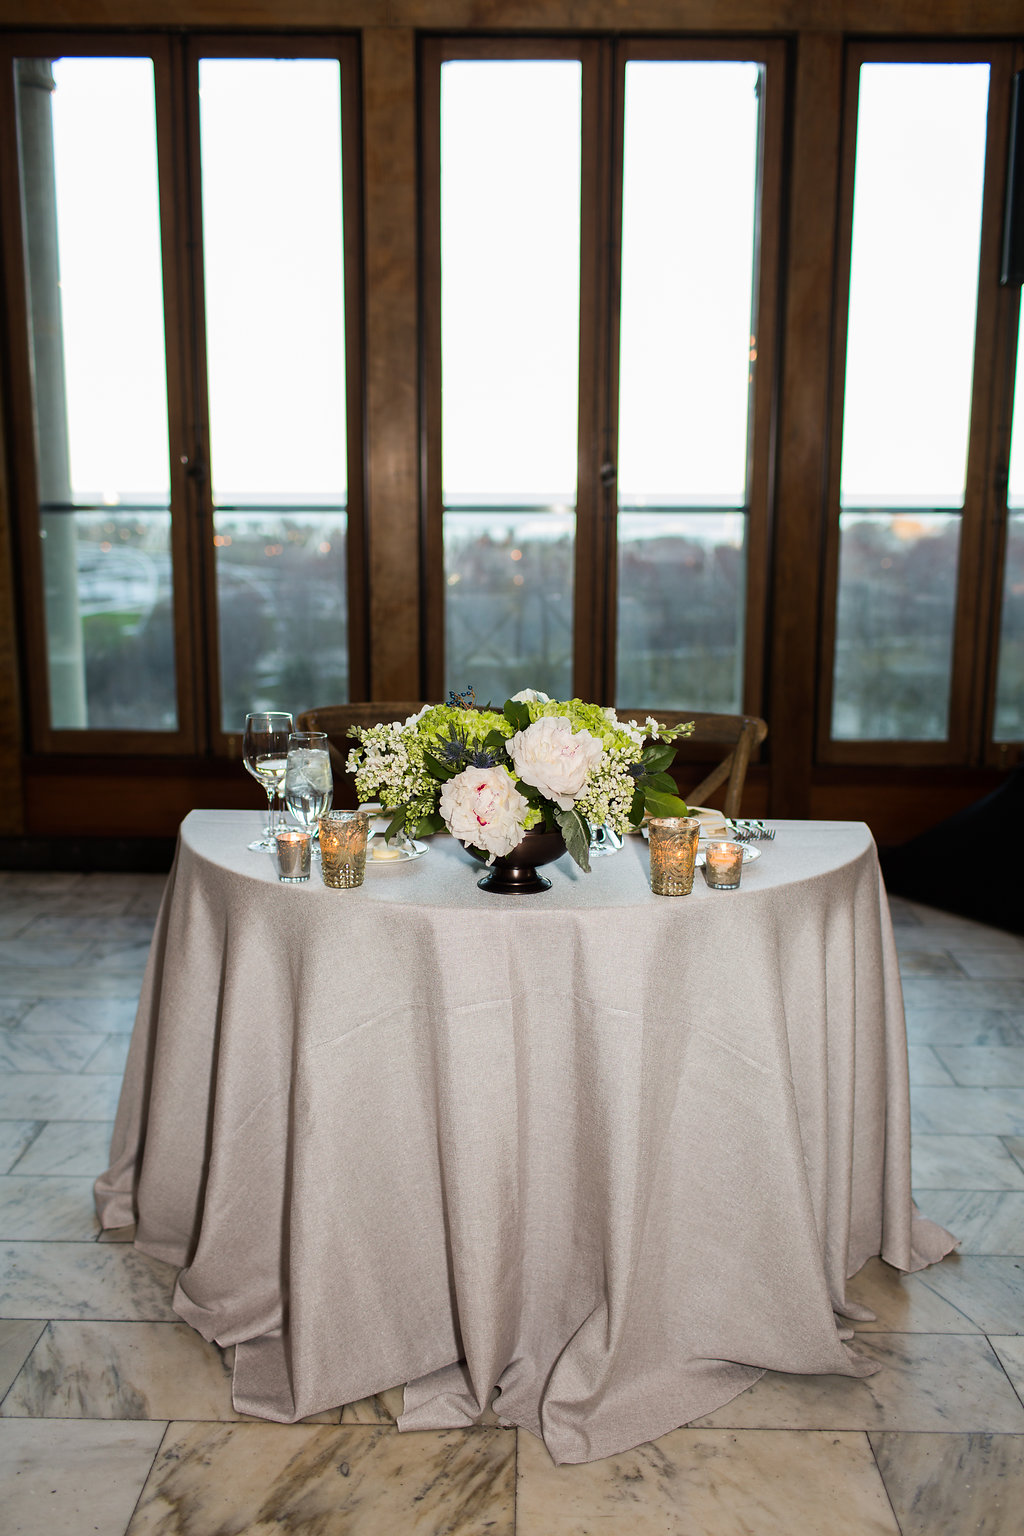 Sweetheart table centerpiece for spring wedding at Chicago Athletic Association.